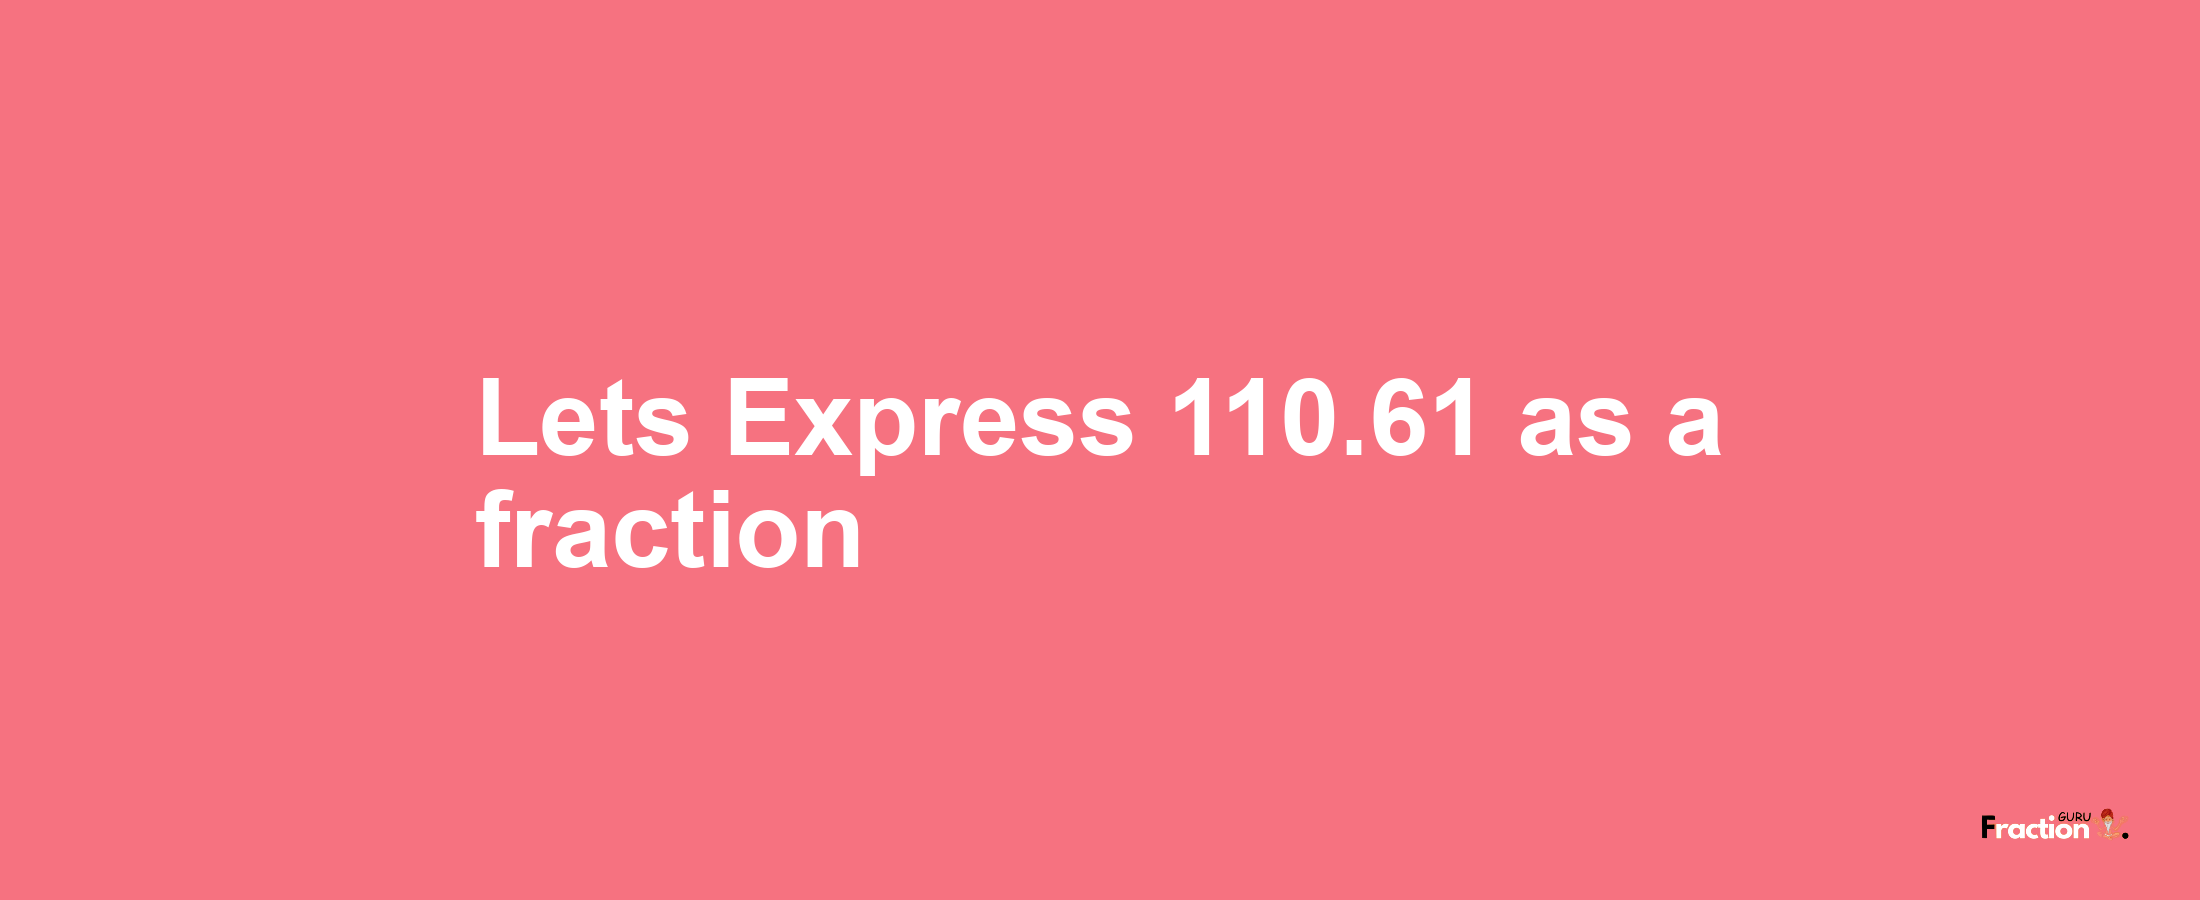 Lets Express 110.61 as afraction